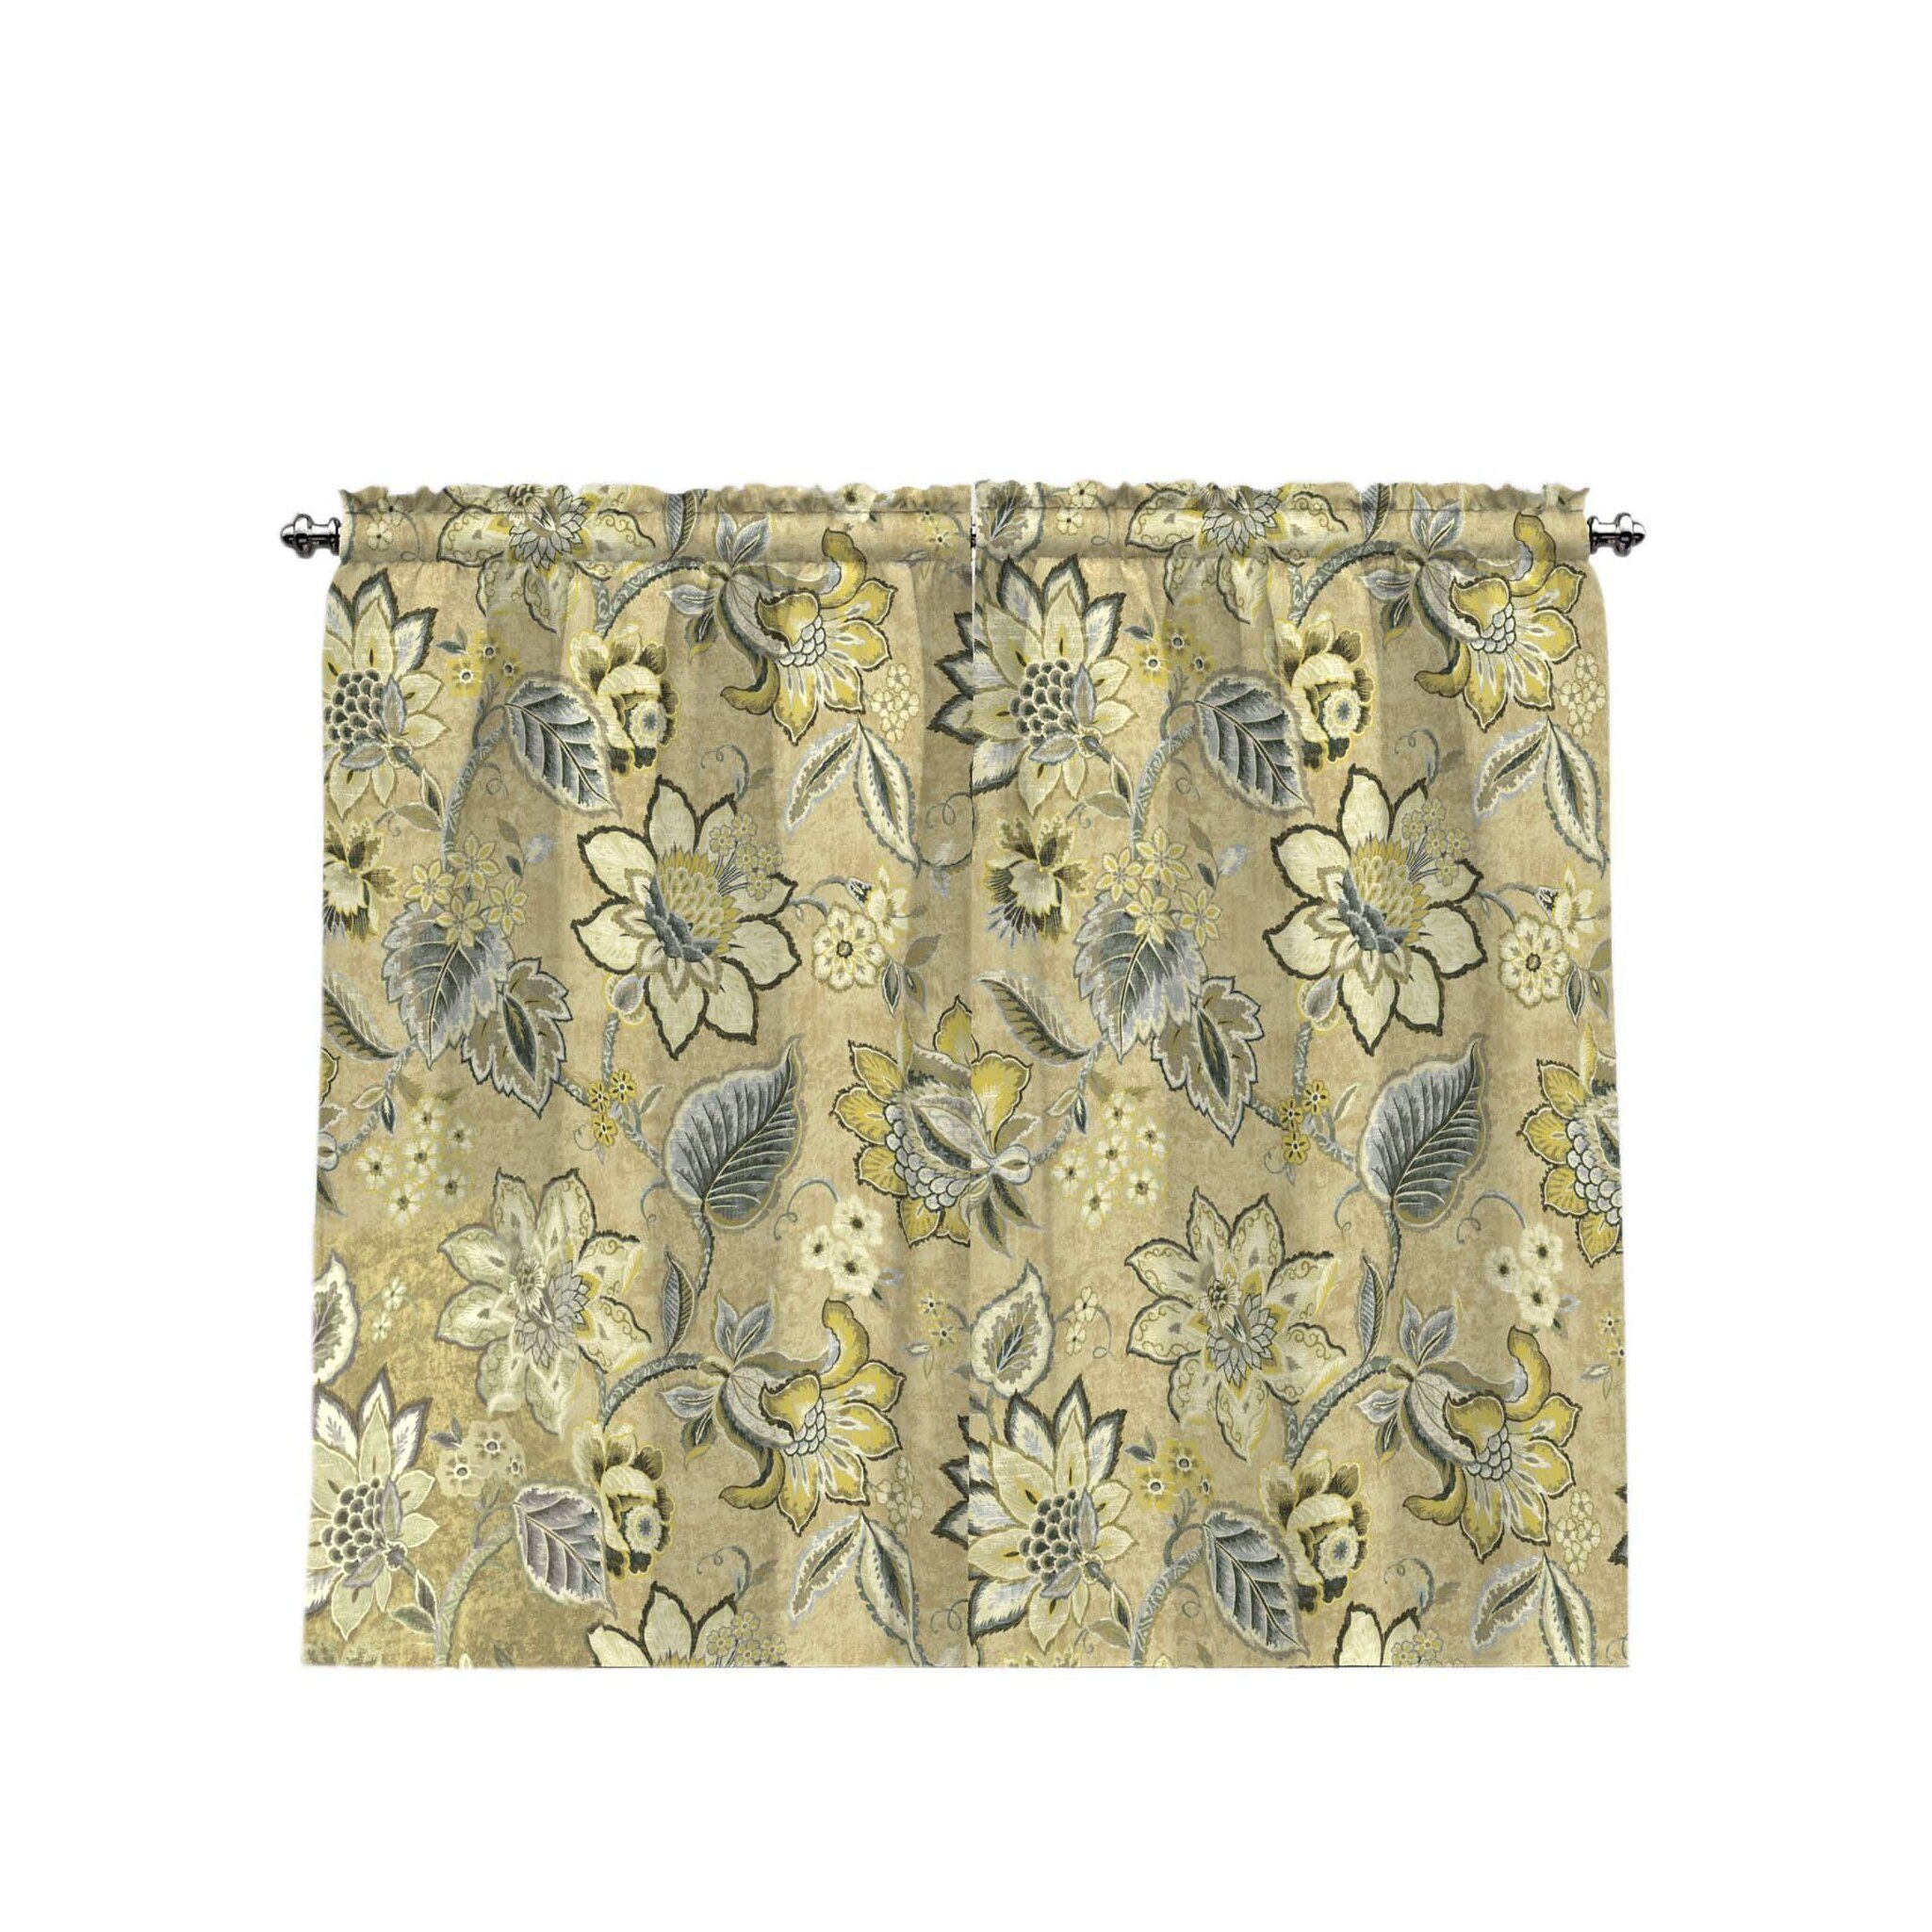 Waverly Brighton Blossom Tier Cafe Curtain & Reviews | Wayfair Within Waverly Felicite Curtain Tiers (View 17 of 20)